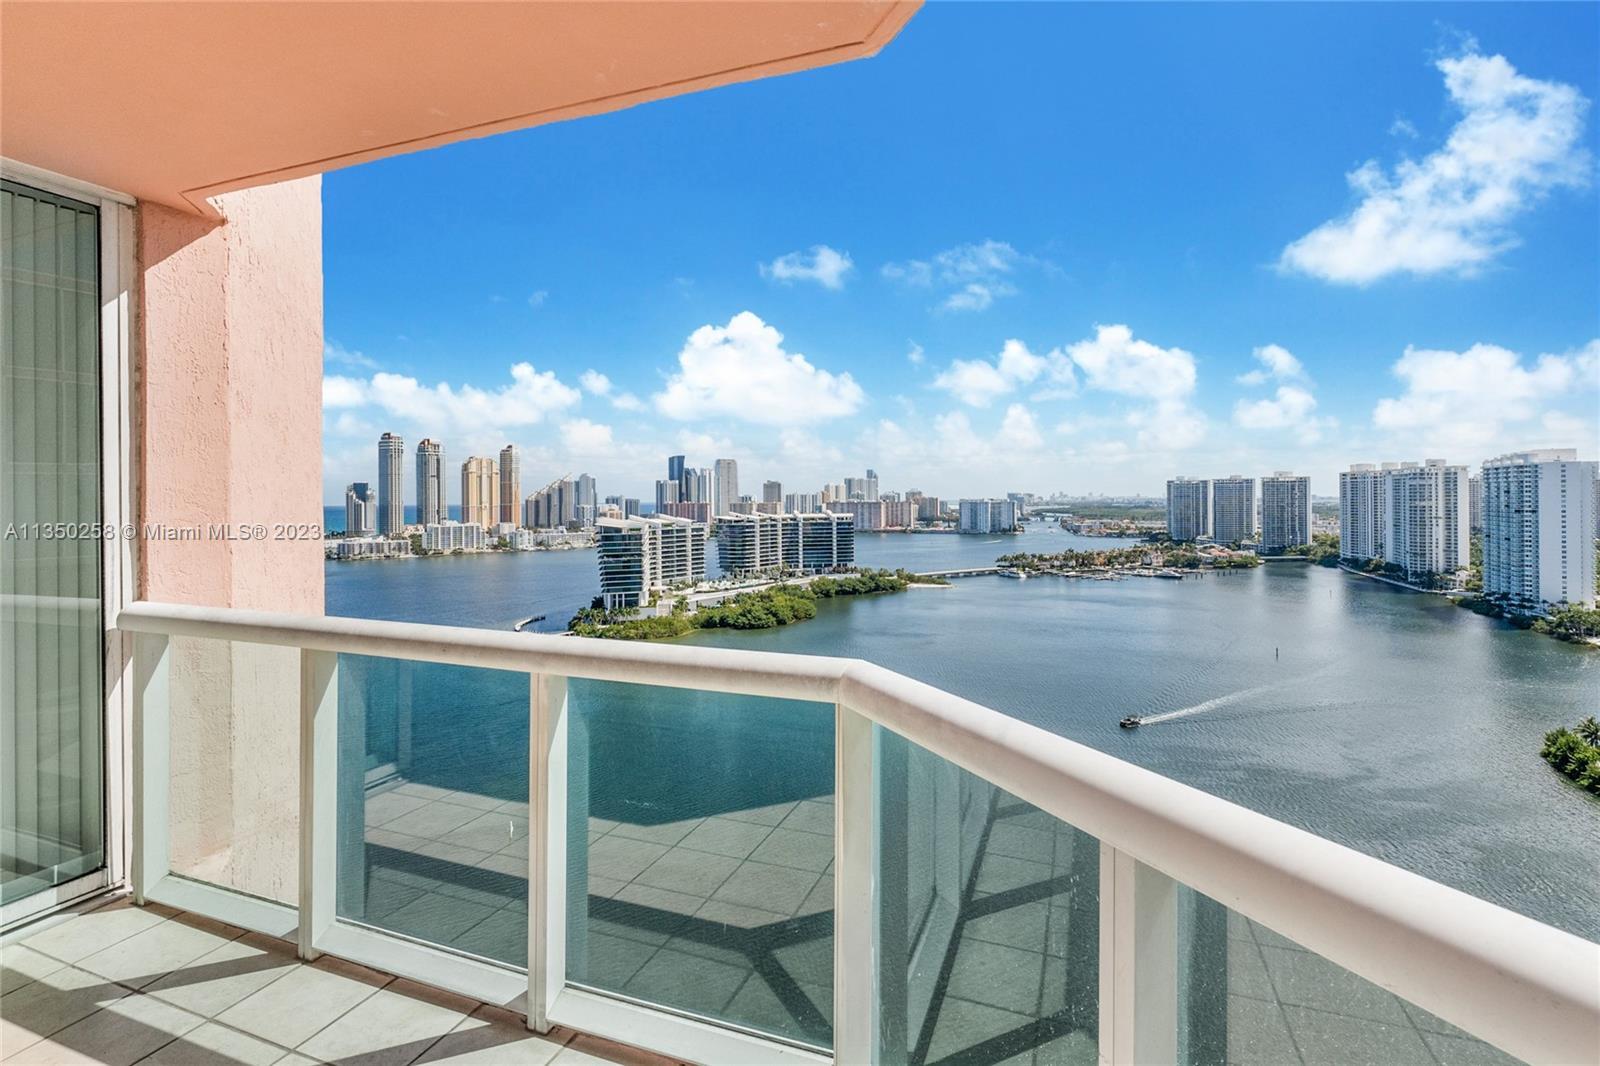 Hidden Bay Condo with breathtaking views in Aventura offered for sale. Well maintained 2 bedroom 2.5